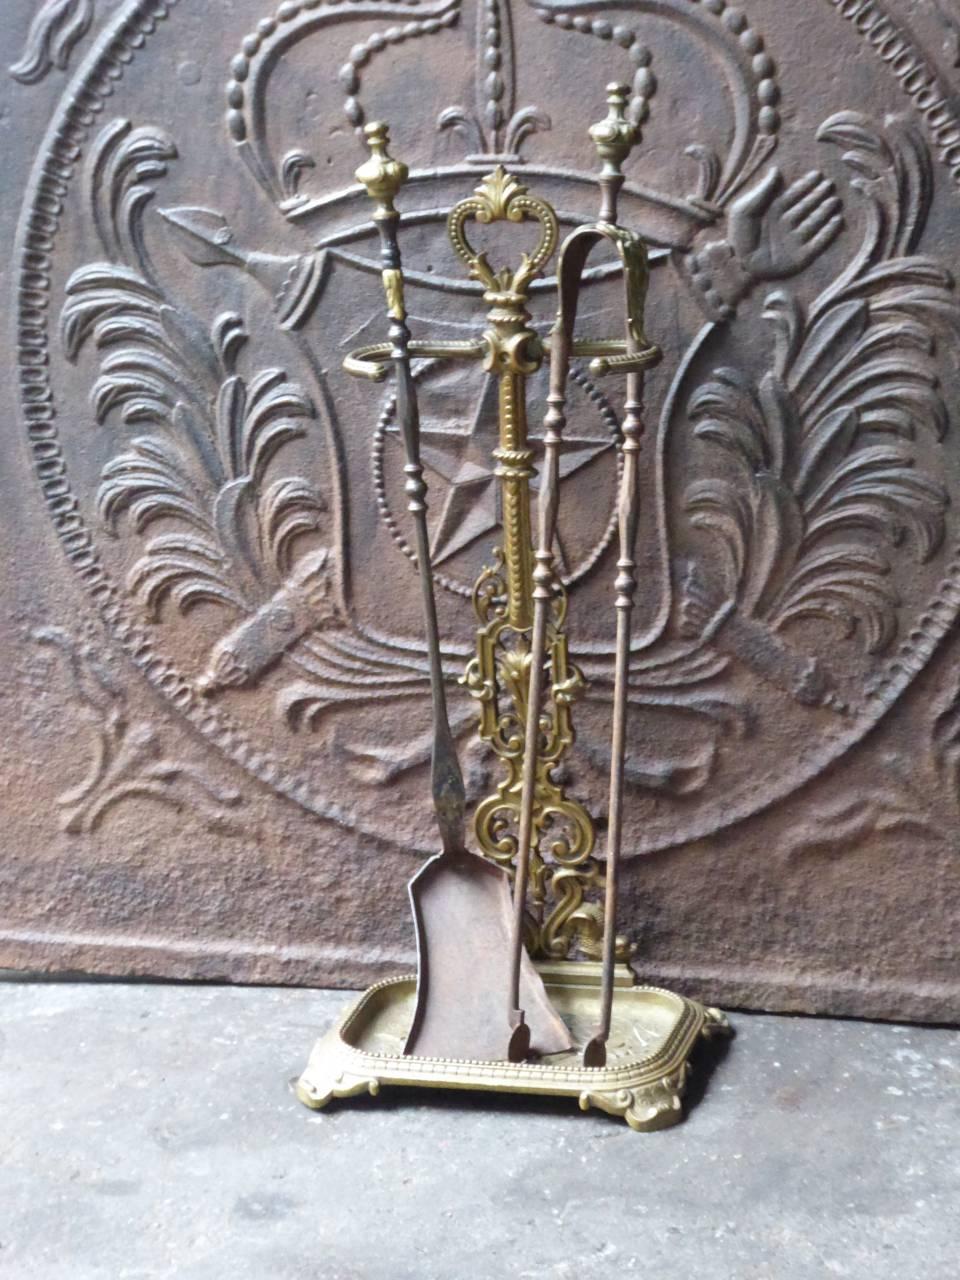 19th century, French Louis XV style fire tools, fire irons made of wrought iron and brass.

We have a unique and specialized collection of antique and used fireplace accessories consisting of more than 1000 listings at 1stdibs. Amongst others, we